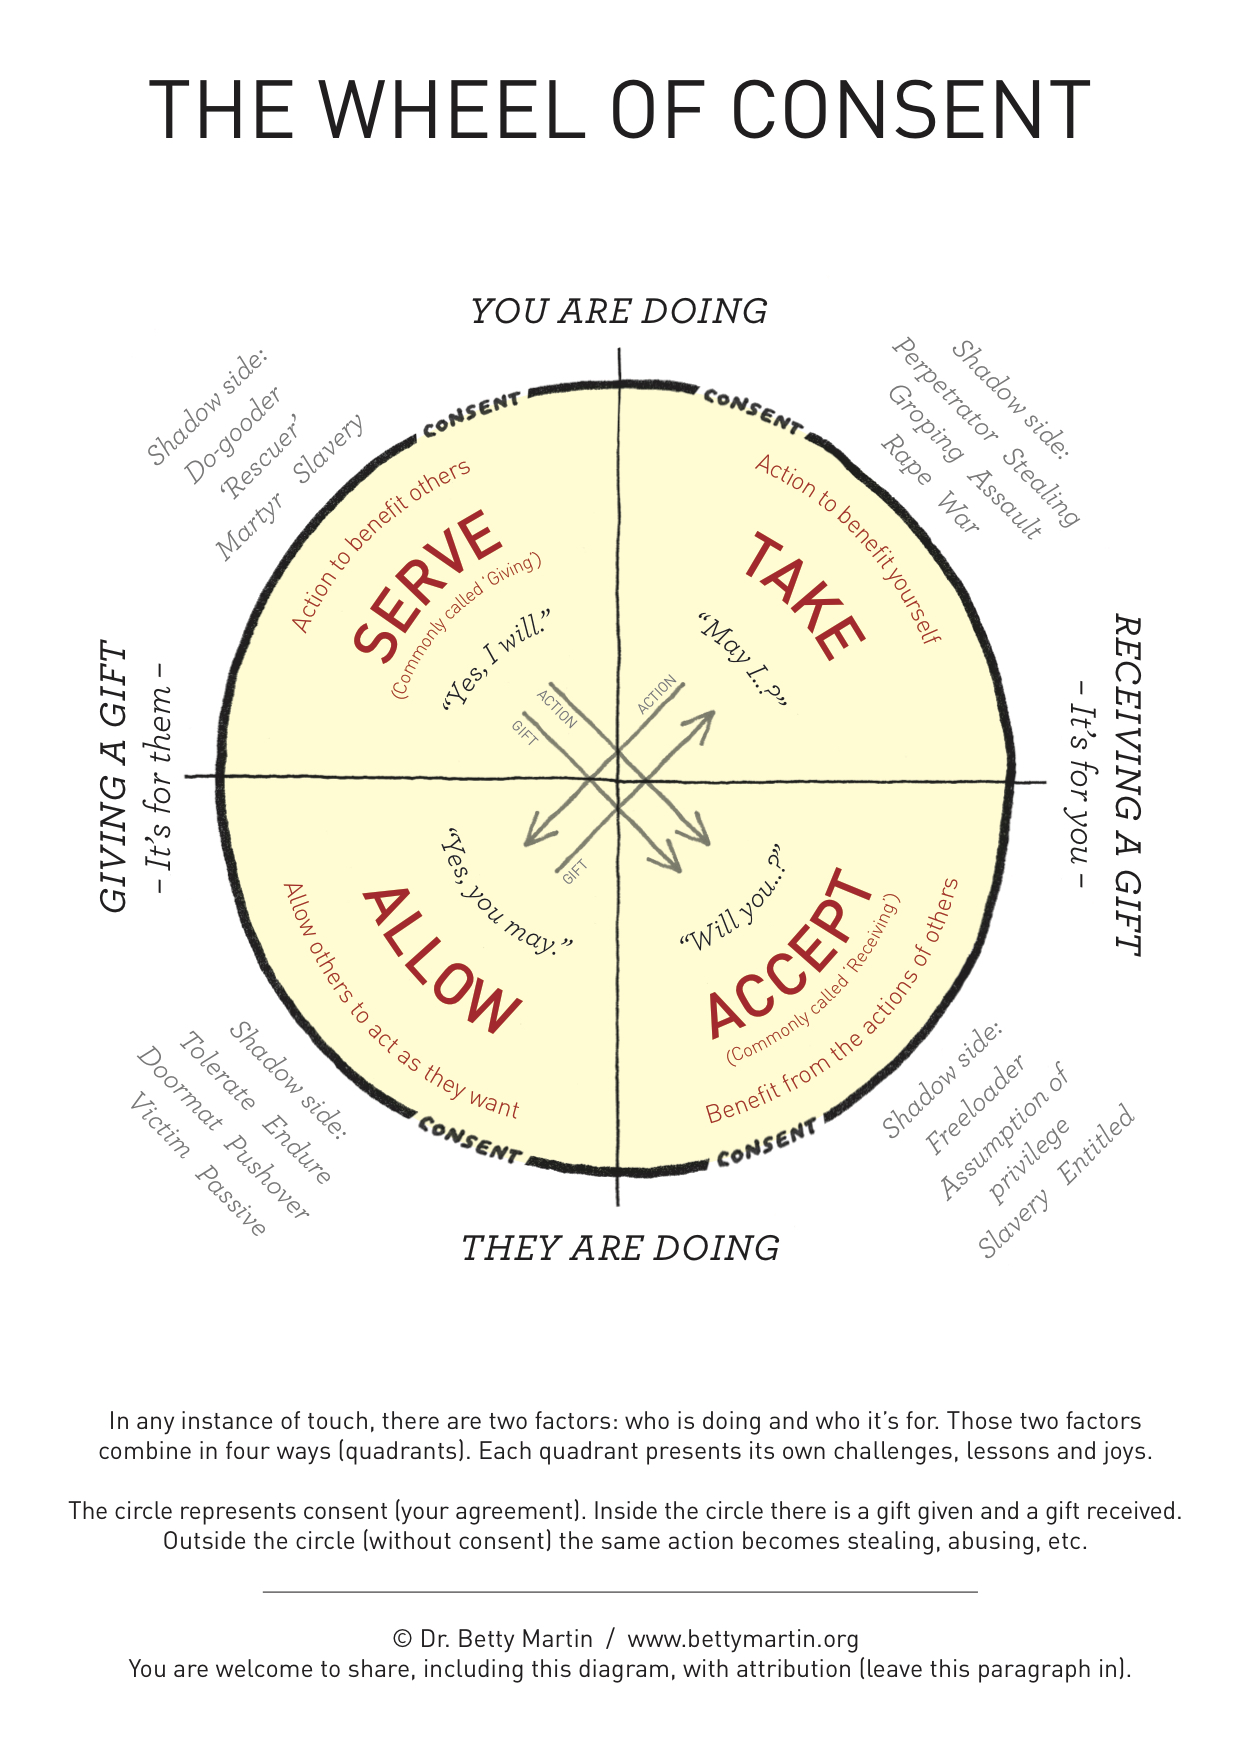 The Wheel of Consent